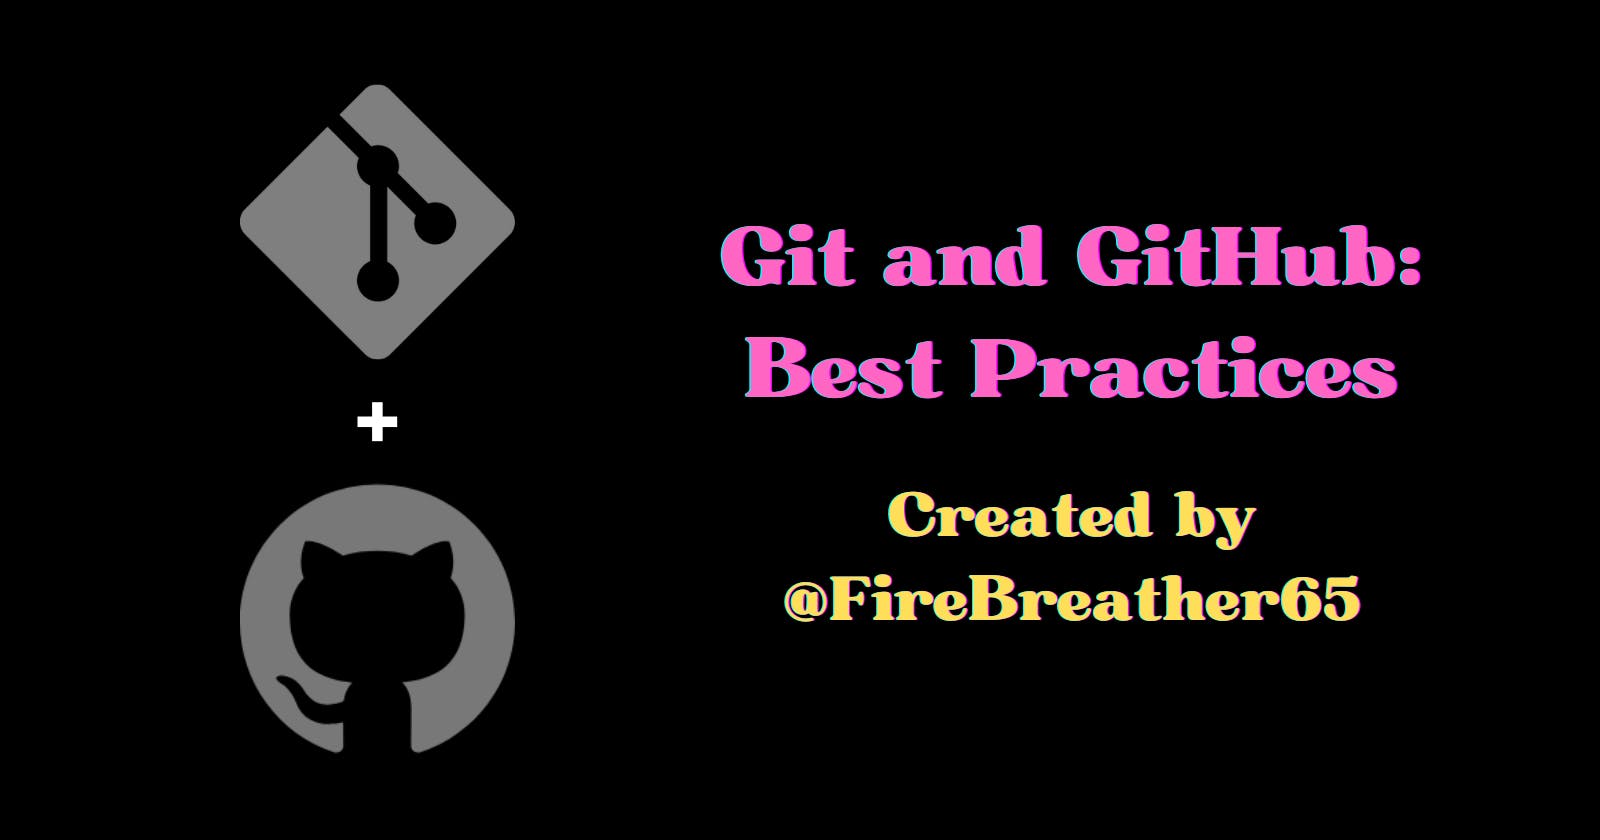 Git and GitHub: Best Practices